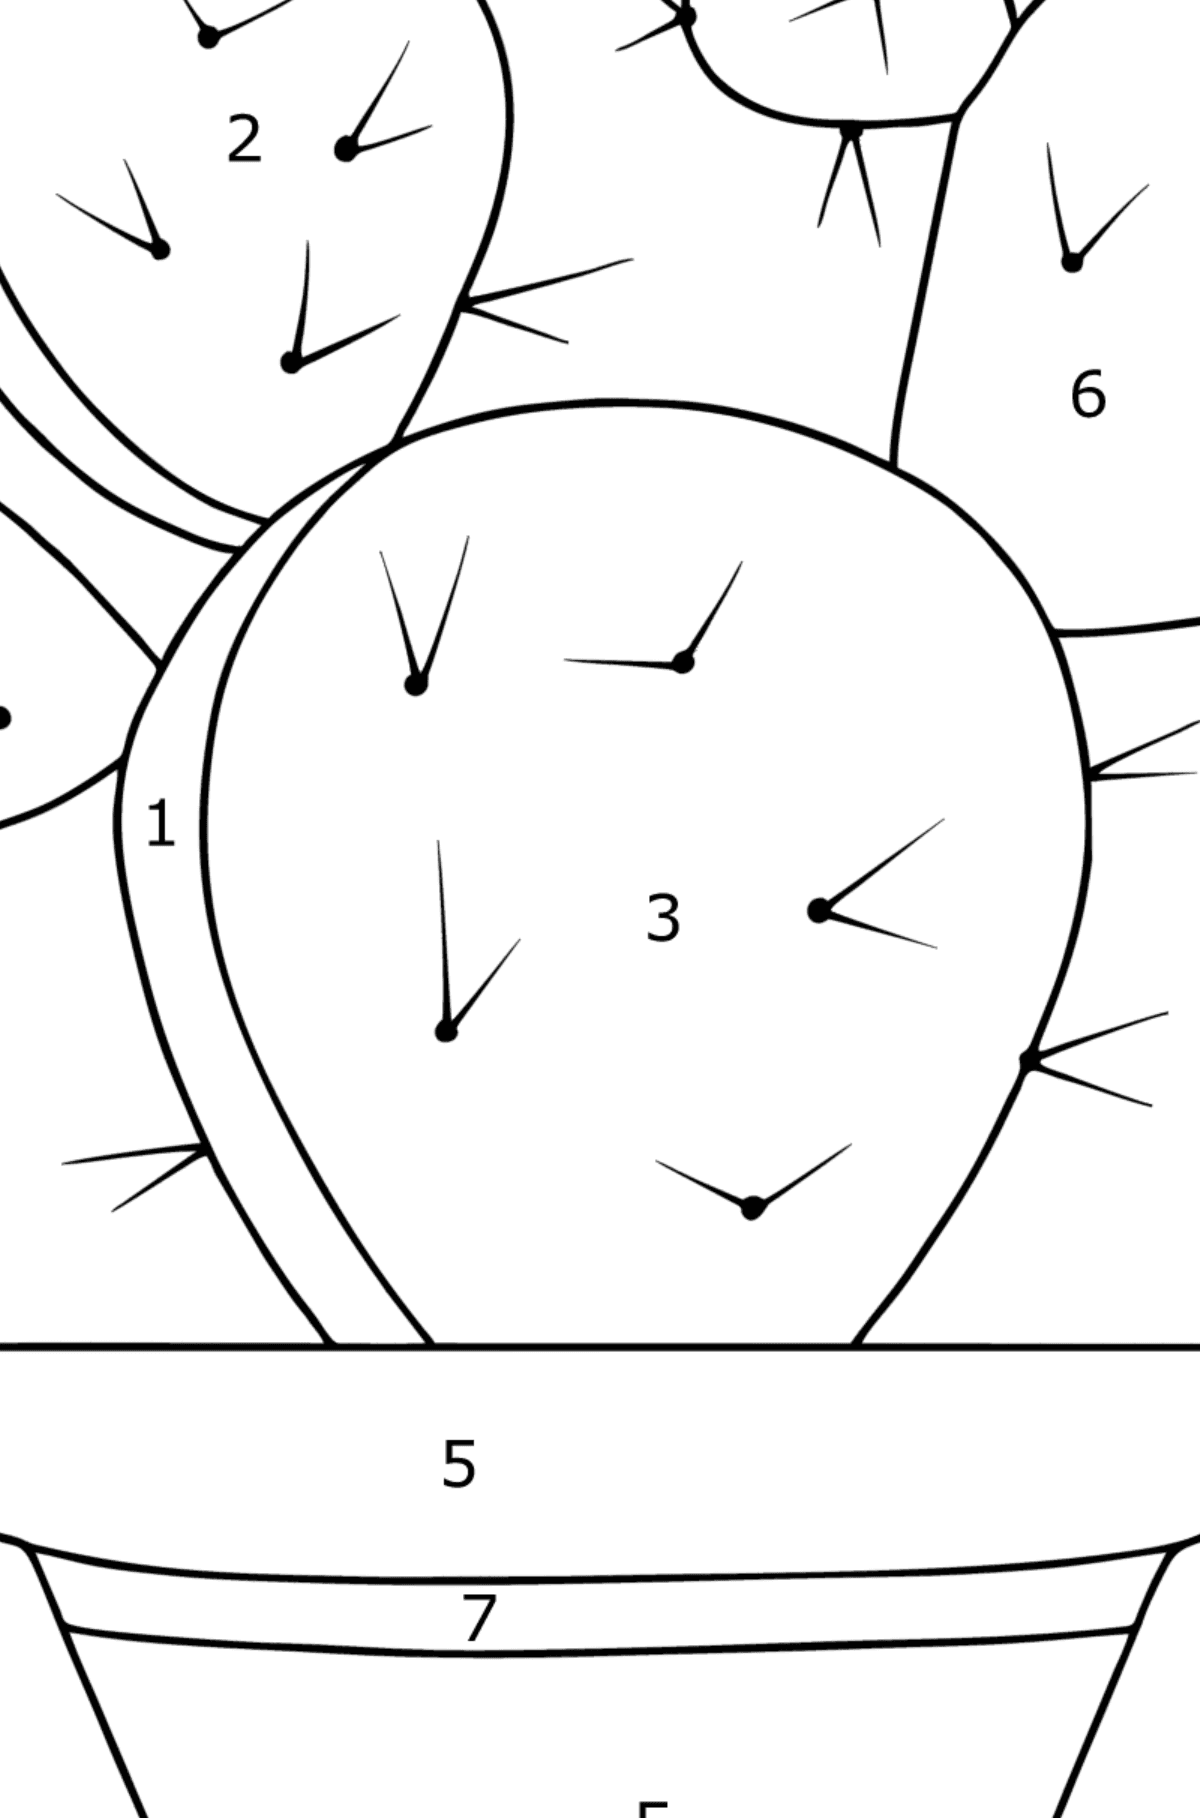 Prickly pear Cactus coloring page - Coloring by Numbers for Kids